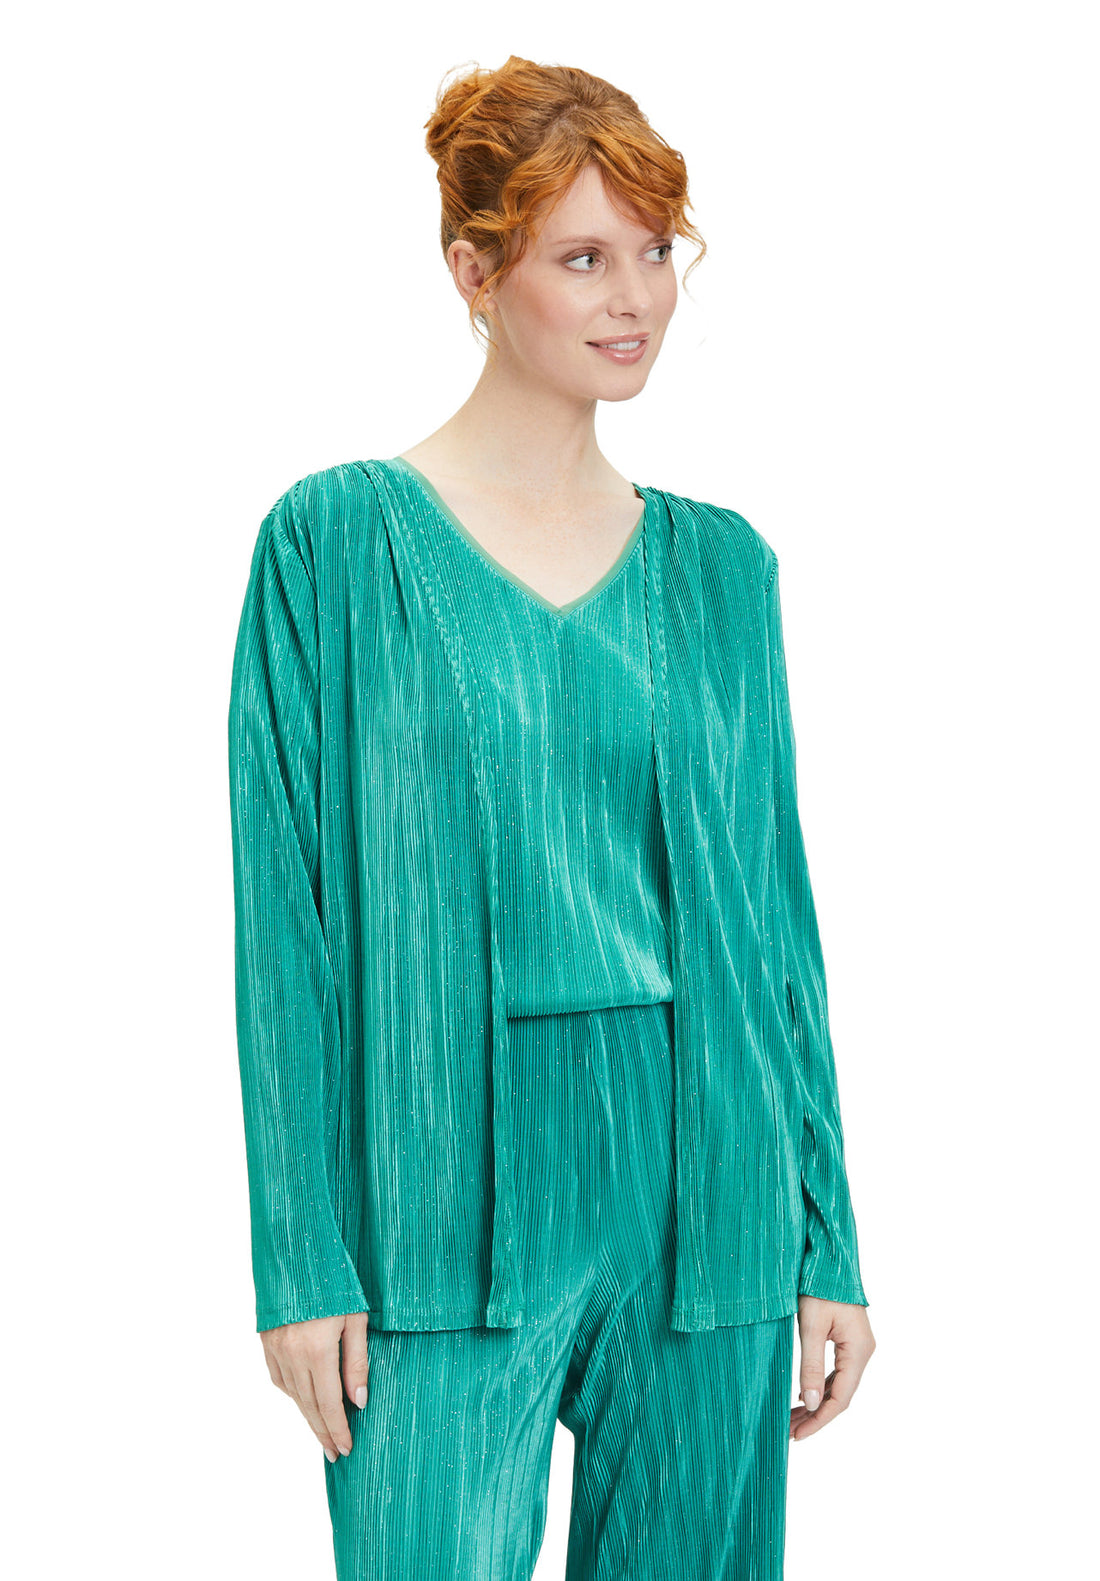 Pleated Cardigan With No Closures_4844 4143_5896_03